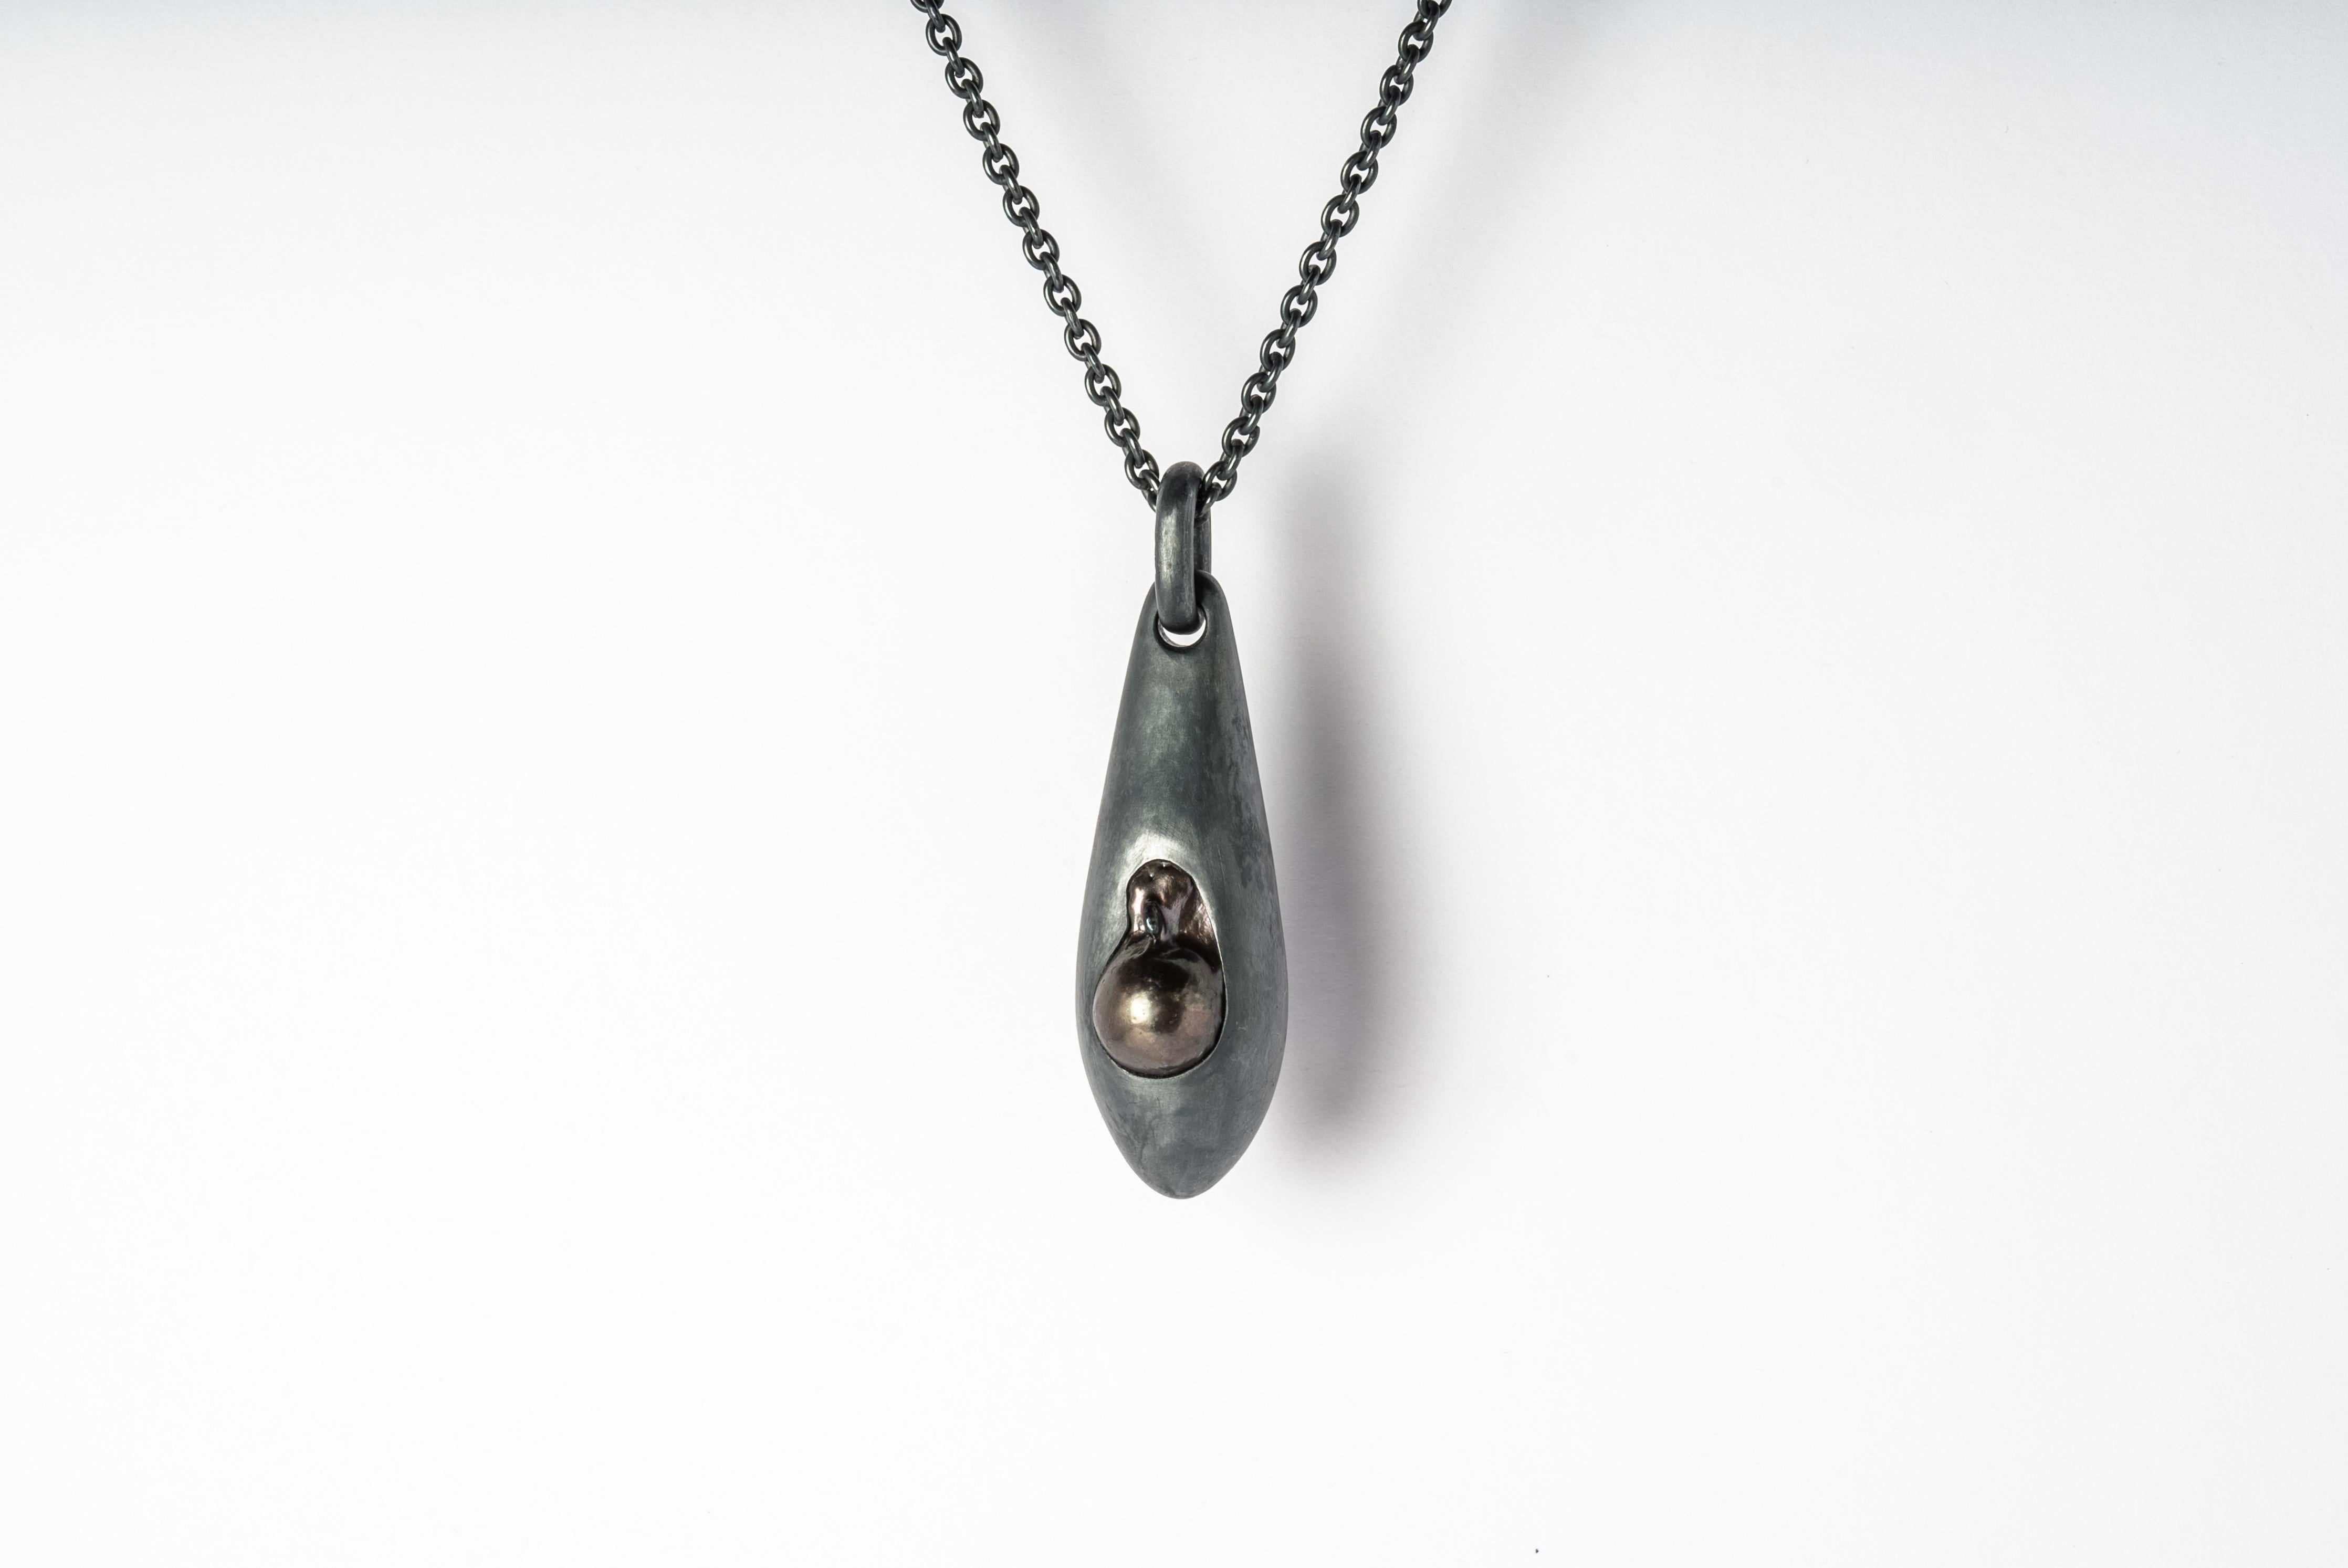 Necklace in the shape of chrysalis made in black sterling silver and a bead of black rainbow pearl. Black Sterling is a surface oxidation of sterling silver. This finish may fade over time, which can be considered an enhancement. It comes on 74 cm